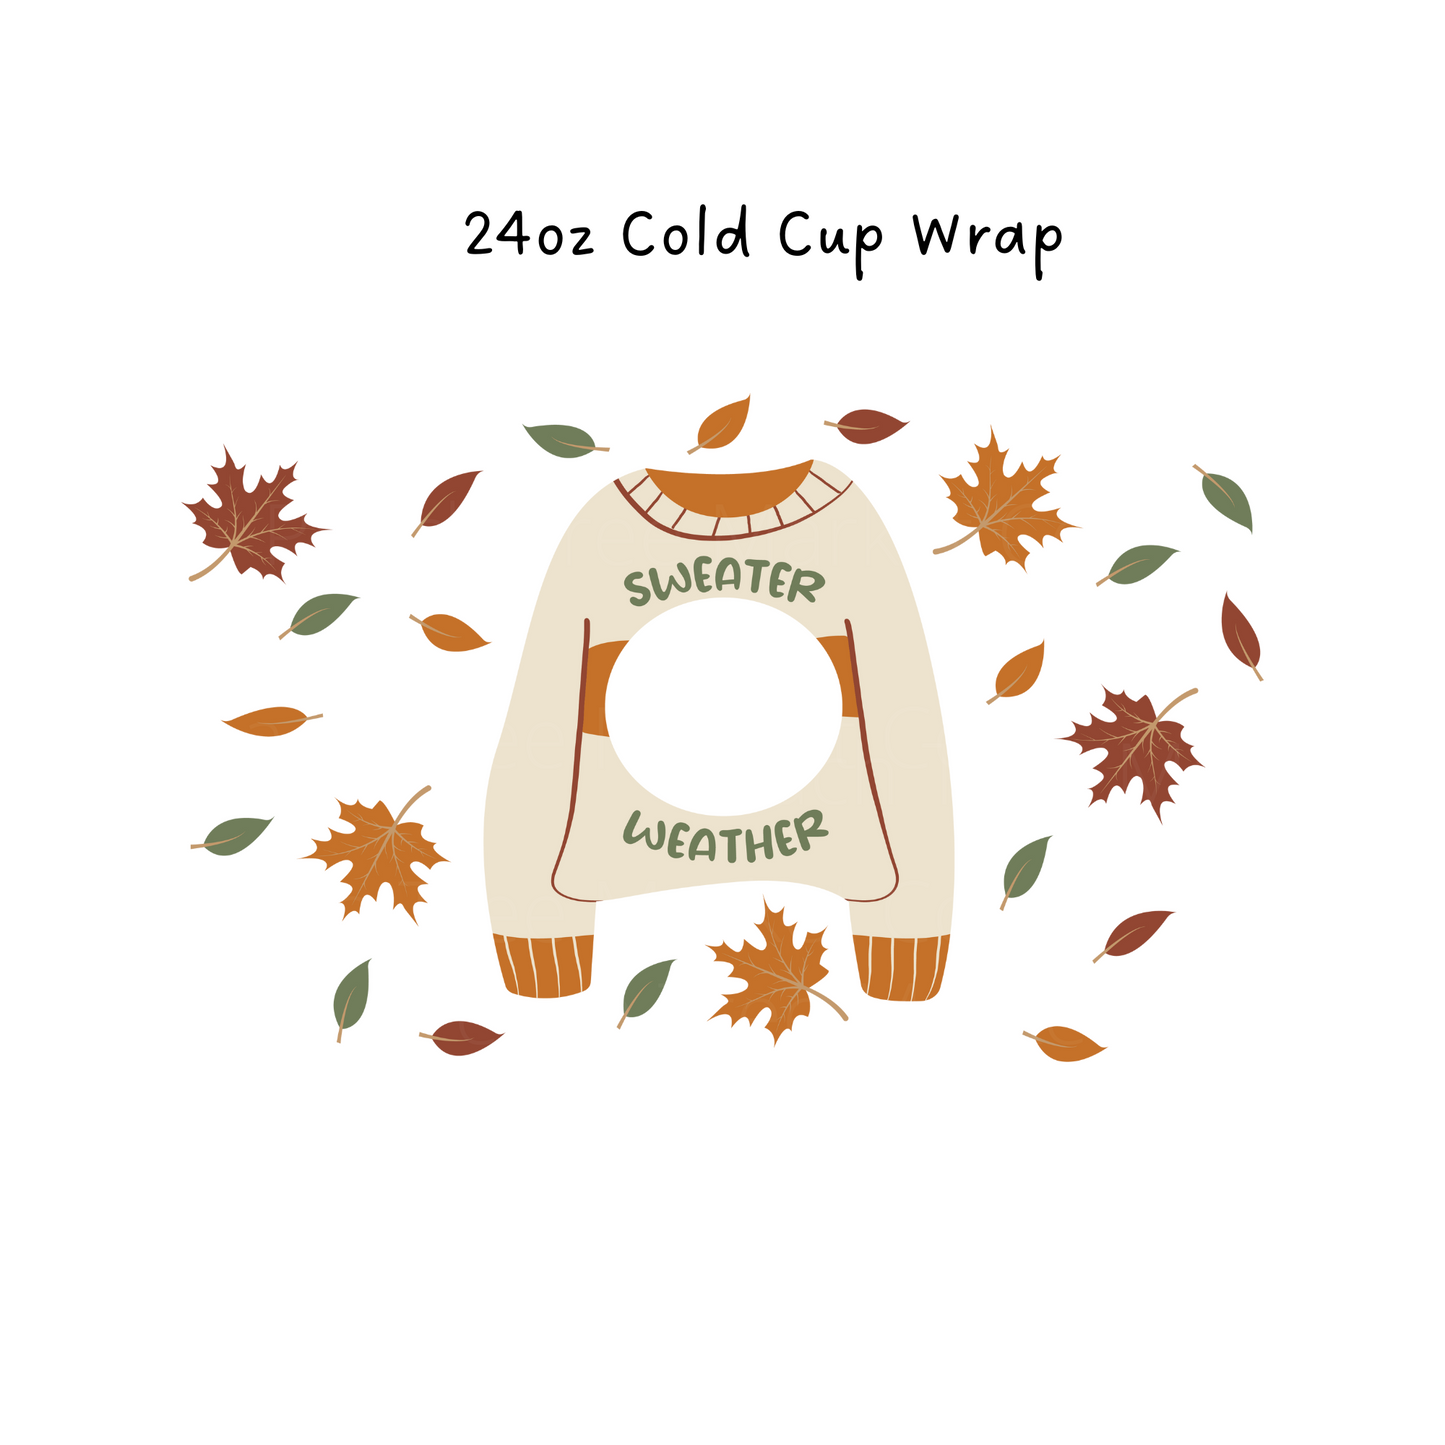 Sweater Weather Cold Cup Wrap